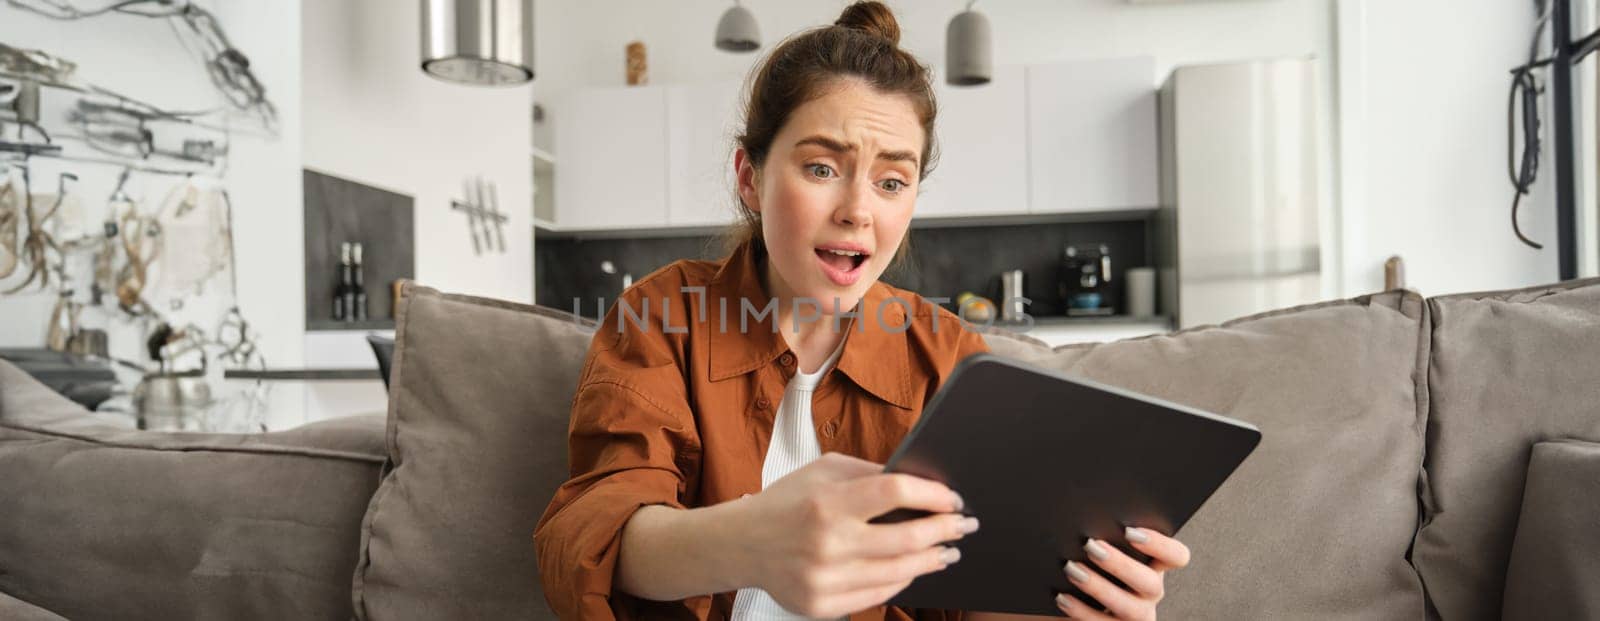 Portrait of woman with worried face looking at her digital tablet, losing in video game, sitting on couch at home. Technology and leisure concept